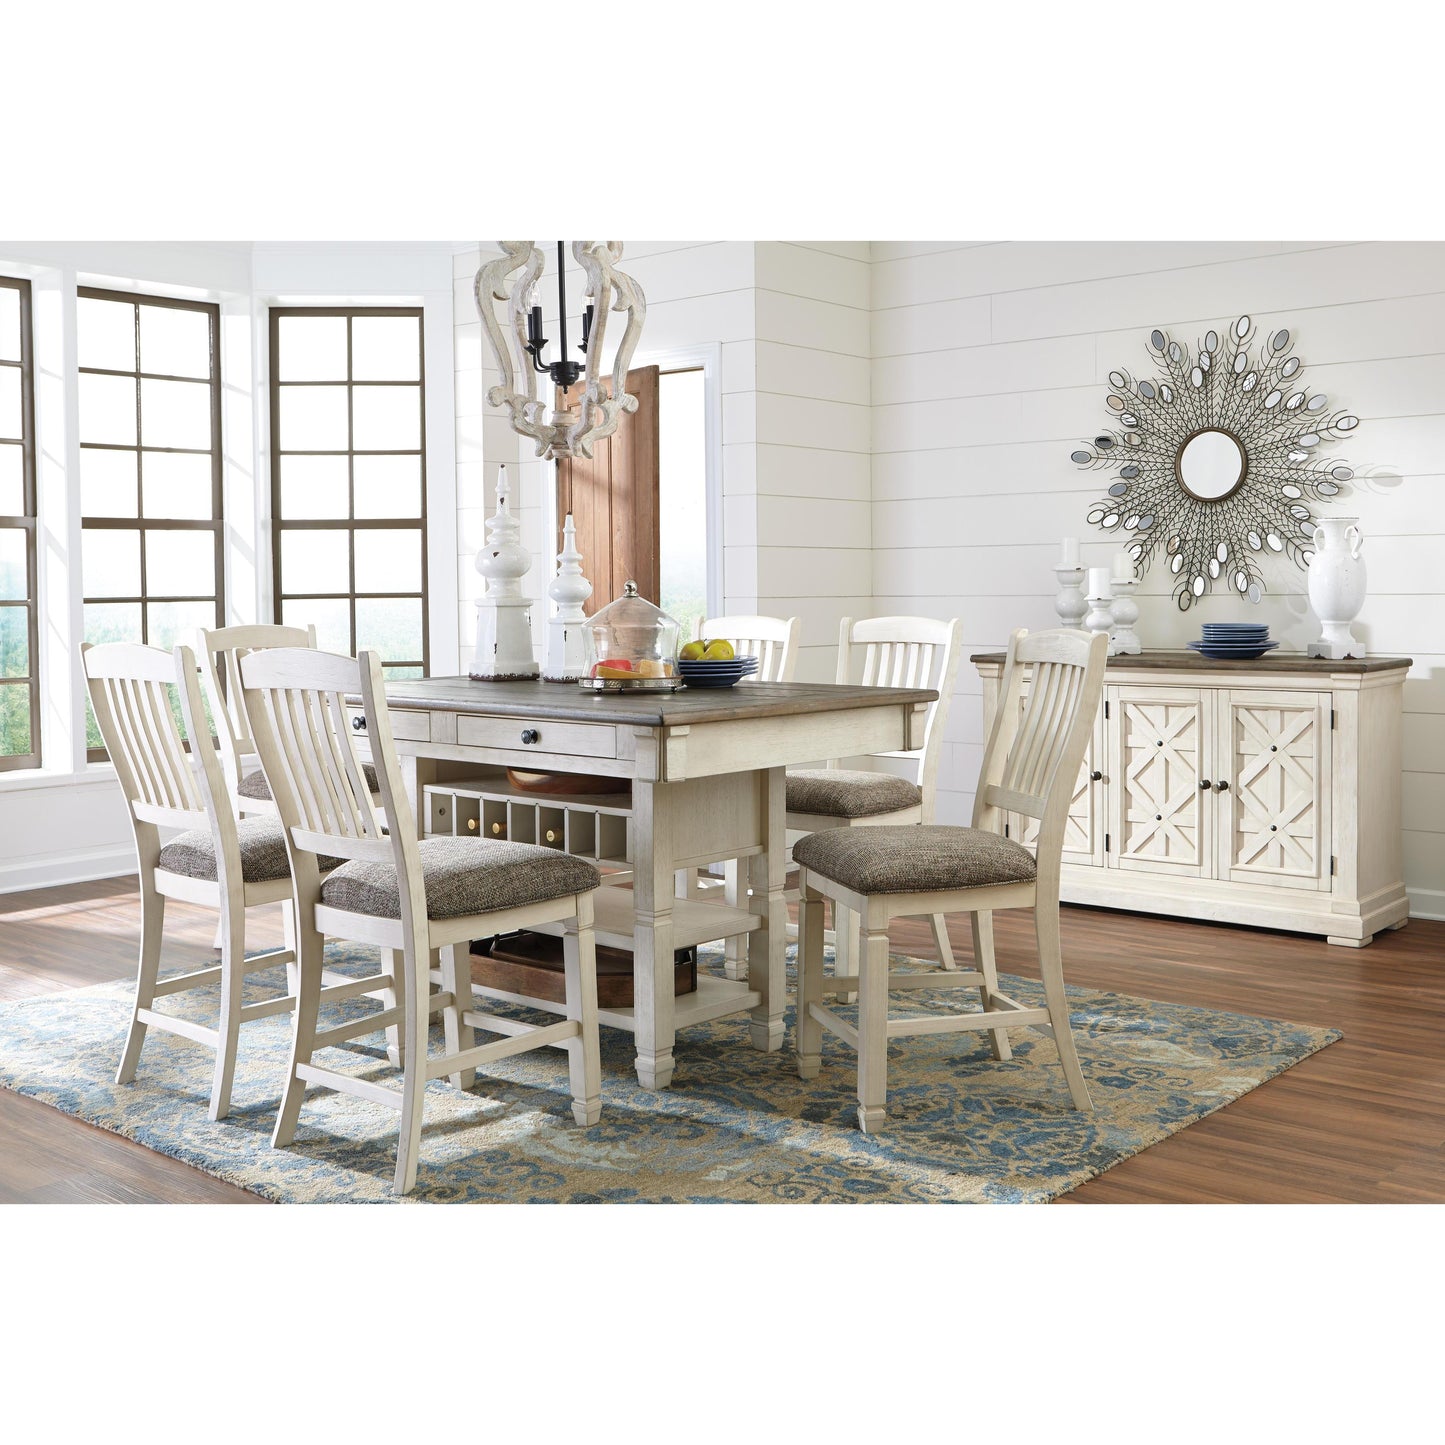 Signature Design by Ashley Bolanburg D647D4 5 pc Counter Height Dining Set IMAGE 2